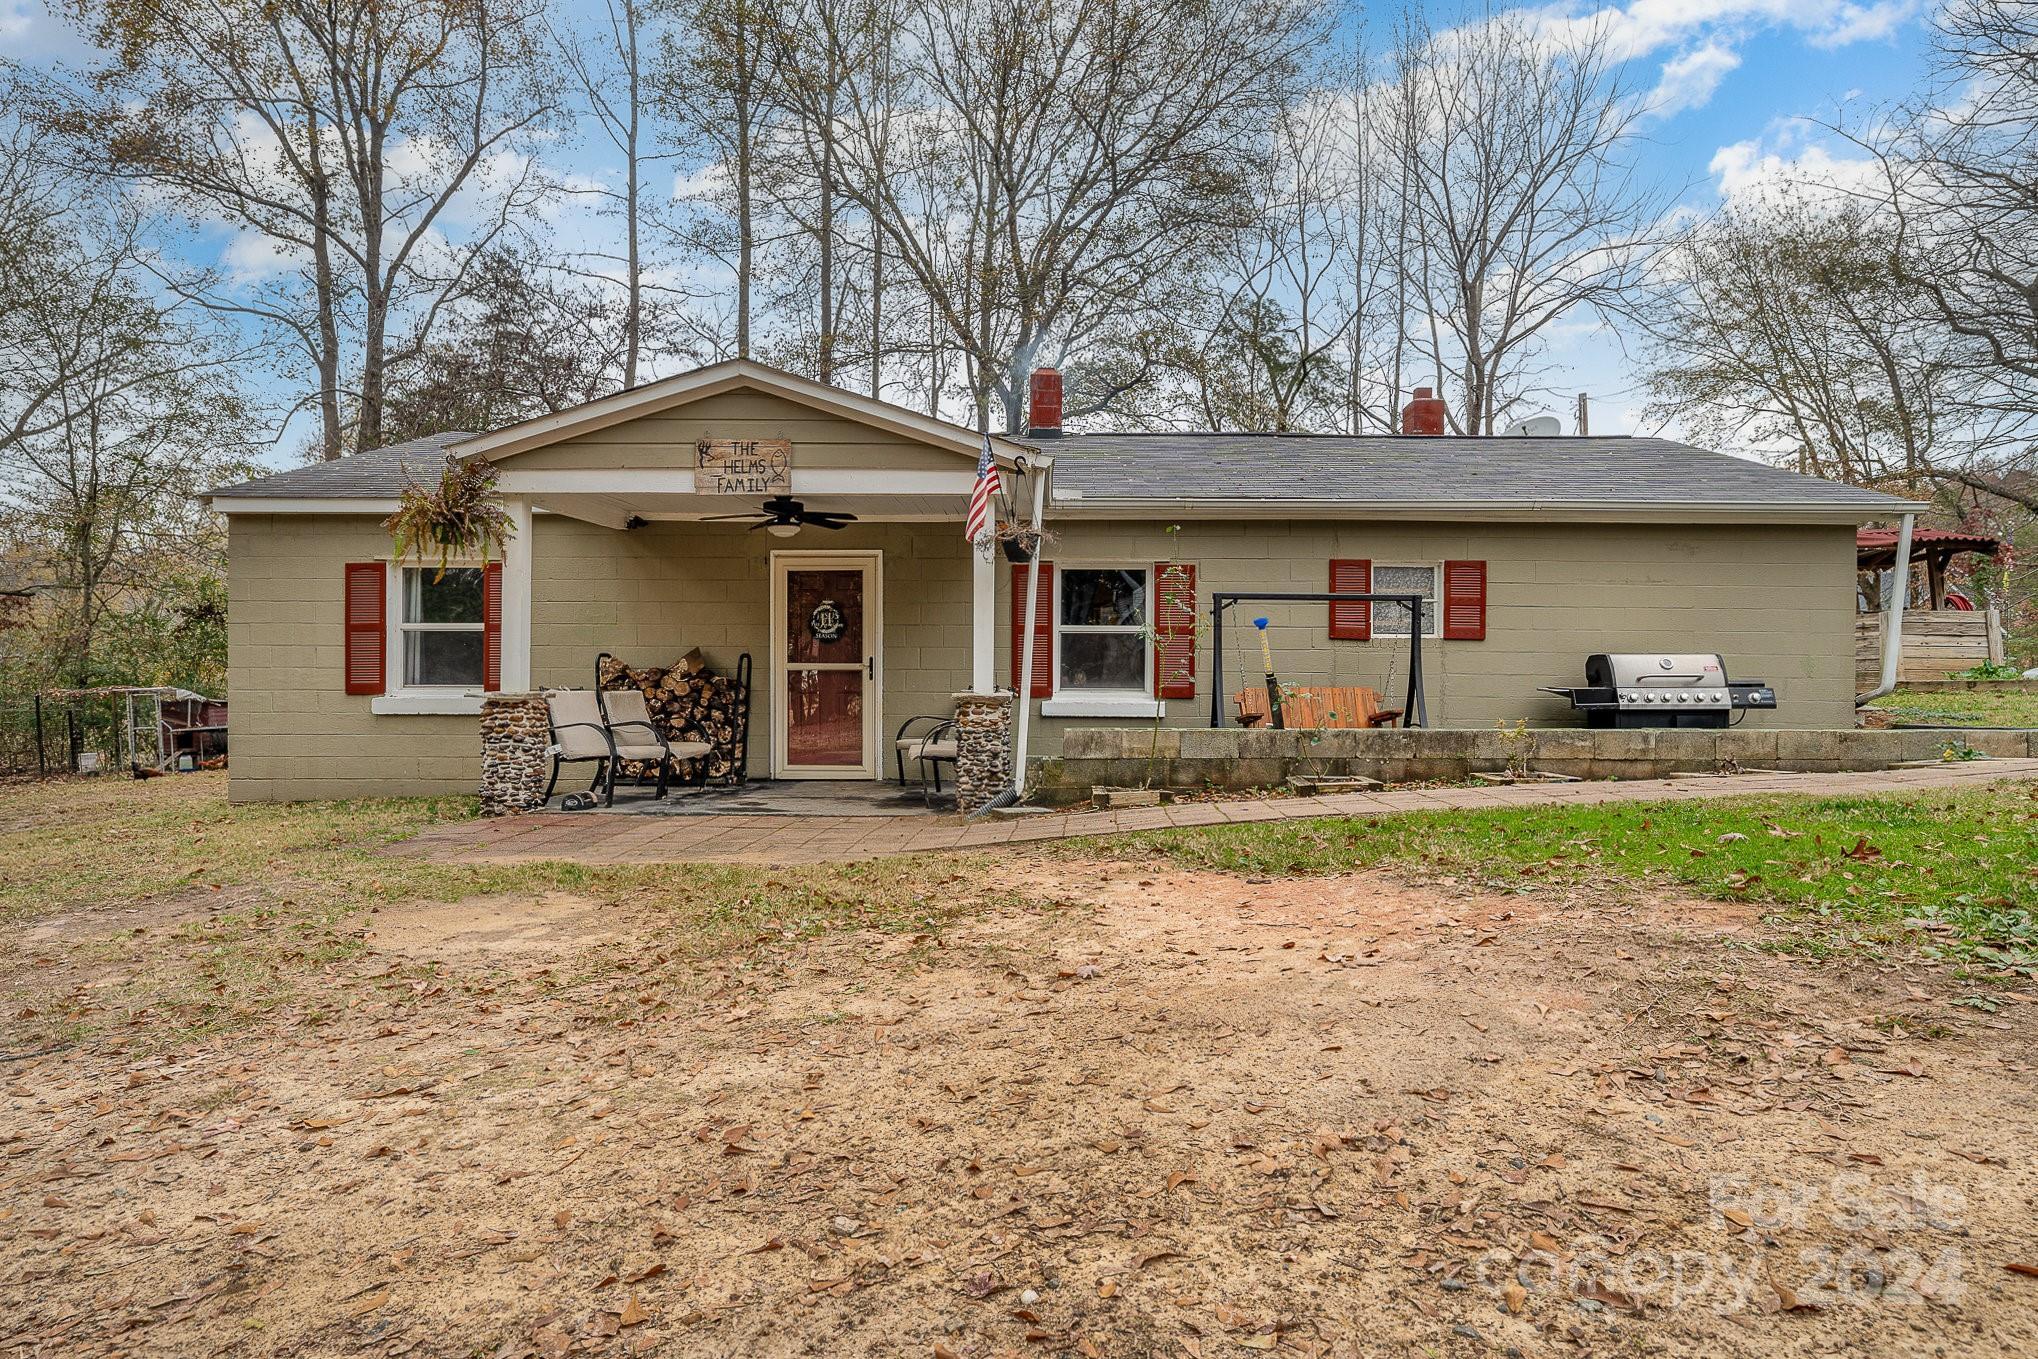 Photo one of 1150 Williams Rd Fort Mill SC 29715 | MLS 4095759